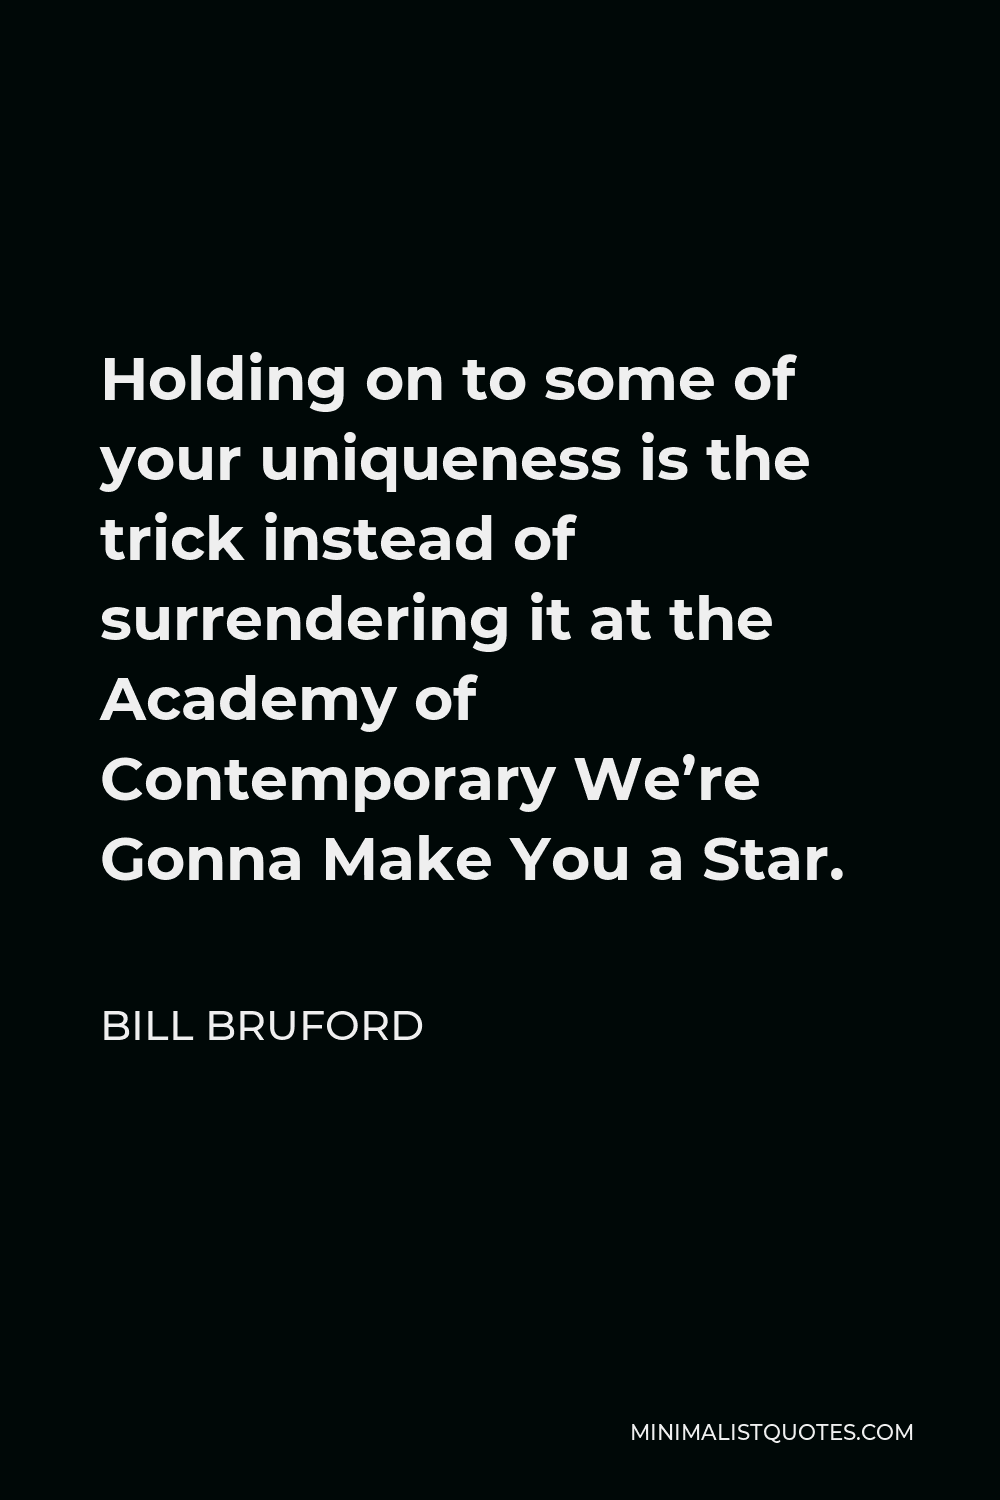 Bill Bruford Quote - Holding on to some of your uniqueness is the trick instead of surrendering it at the Academy of Contemporary We’re Gonna Make You a Star.